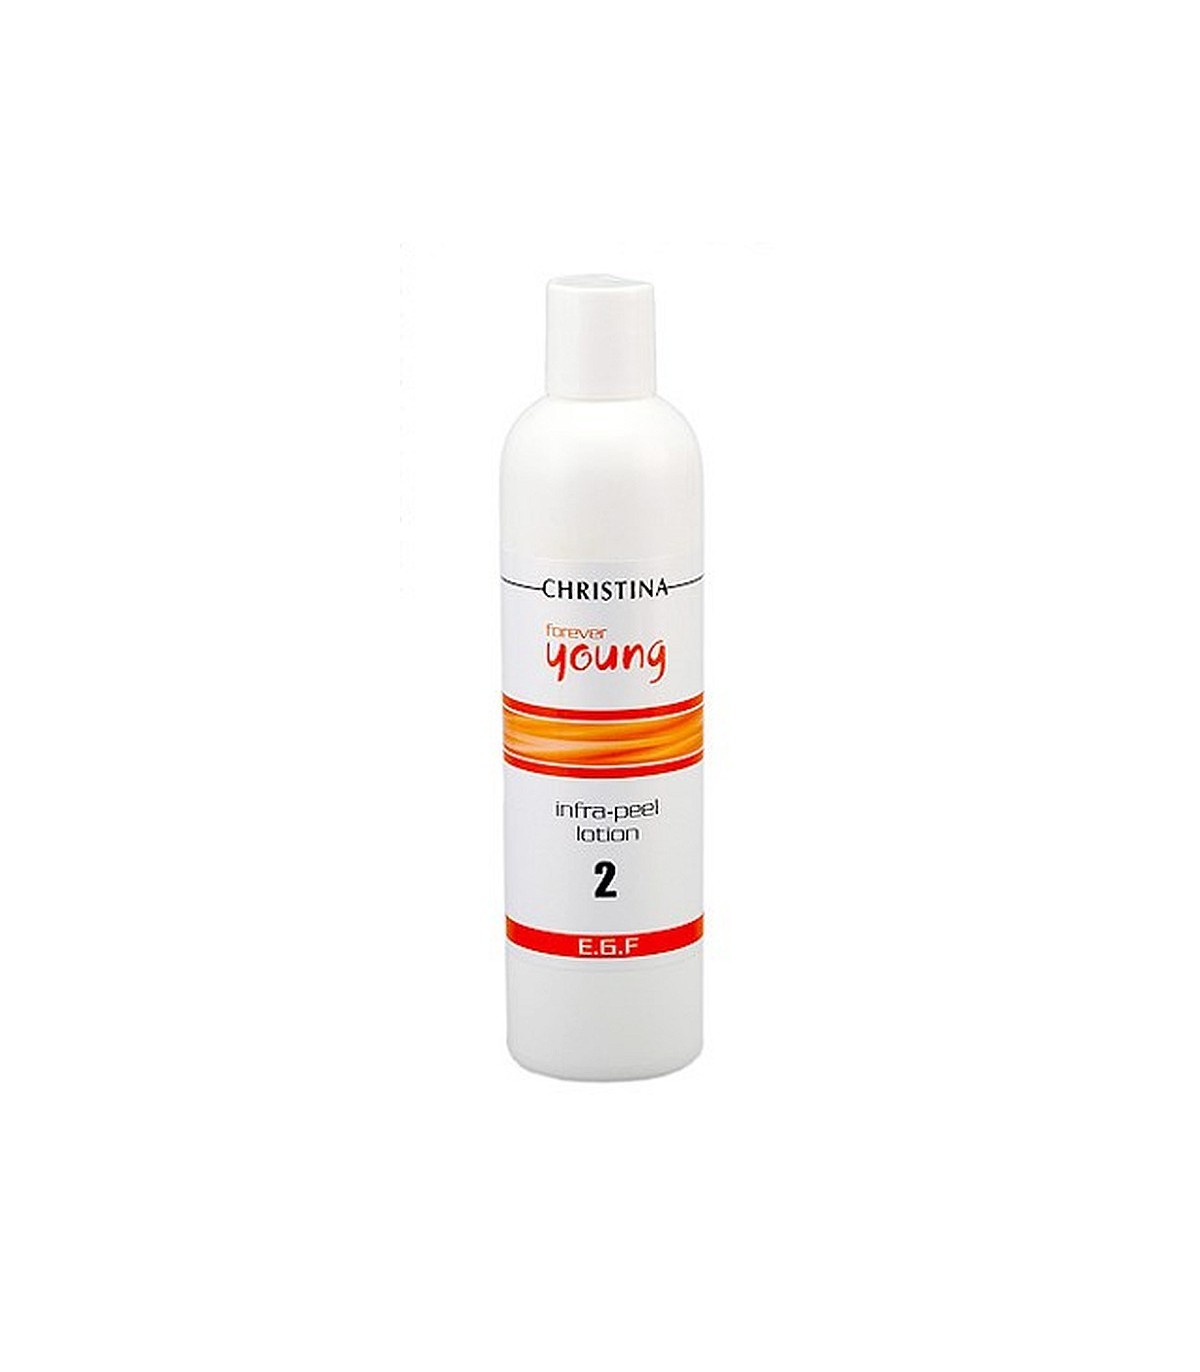 Infra Peel Lotion - 300 ml - Step 2 - Forever Young - Christina